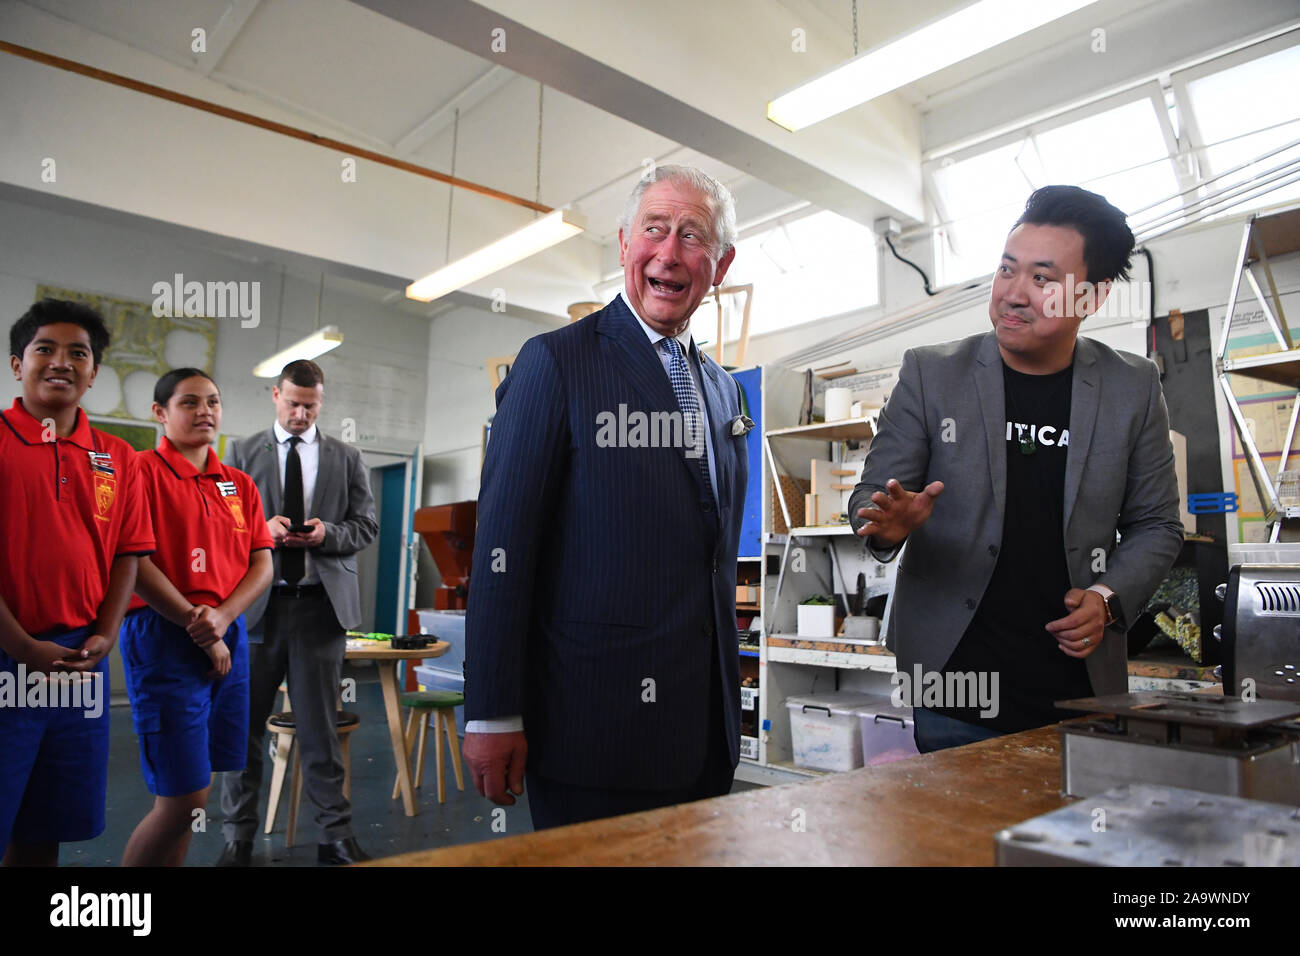 The Prince of Wales looks at the manufacturing process of products made out of plastic waste, during a visit to Critical Design, an Auckland based company that manufactures a range of office and homeware products from recycled materials, at Wesley Intermediate School in Auckland on the second day of the royal visit to New Zealand. Stock Photo